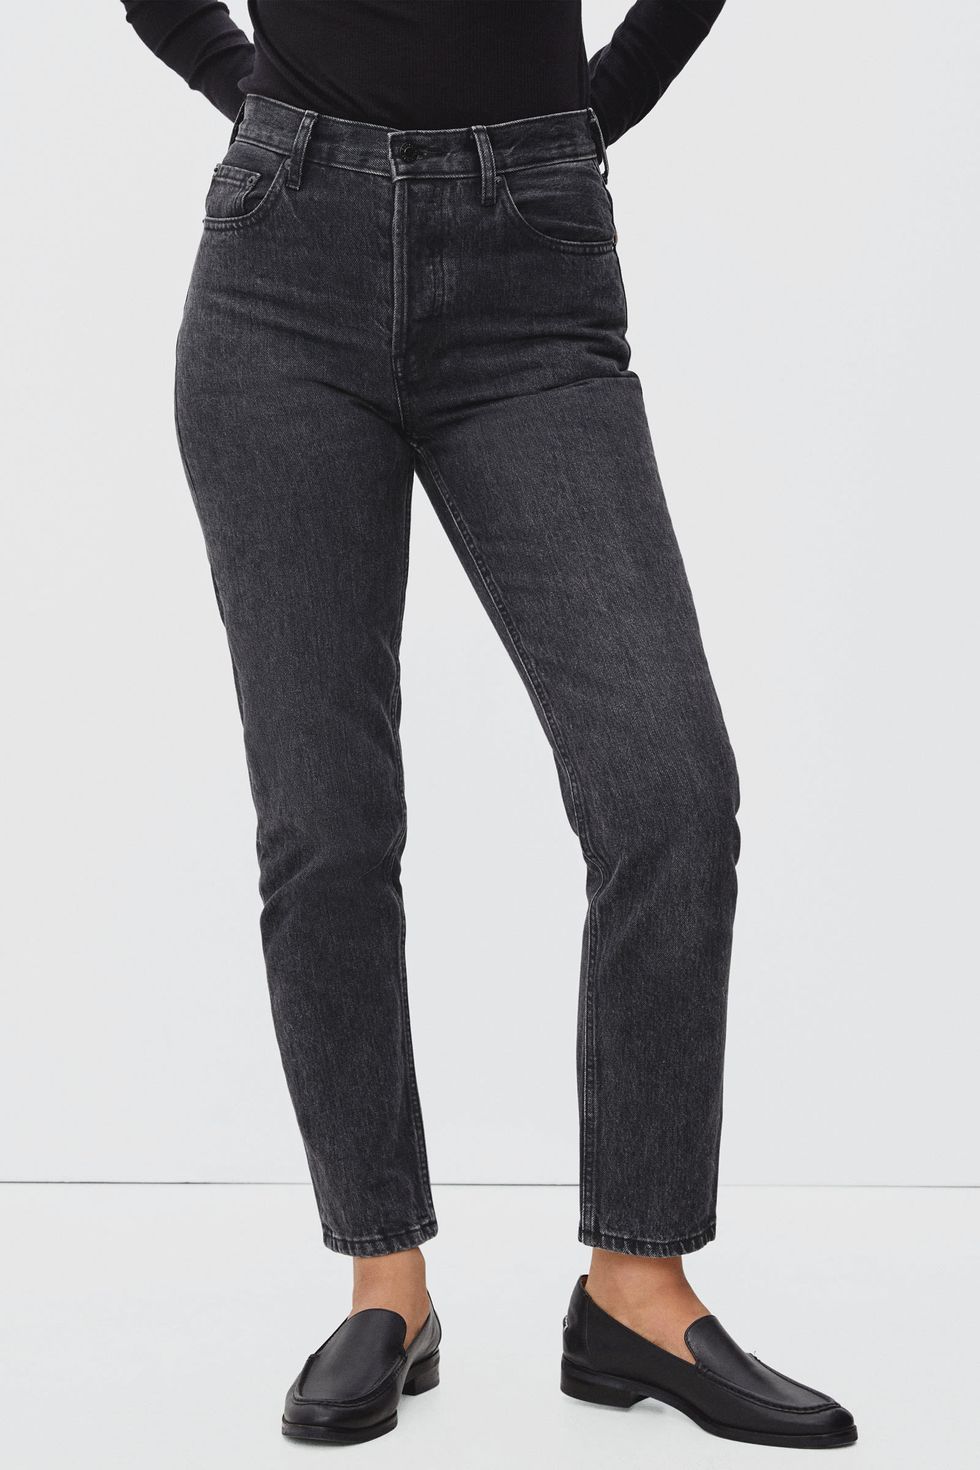 Target Wild Fable High waisted Flare Leggings Black - $13 - From Emma